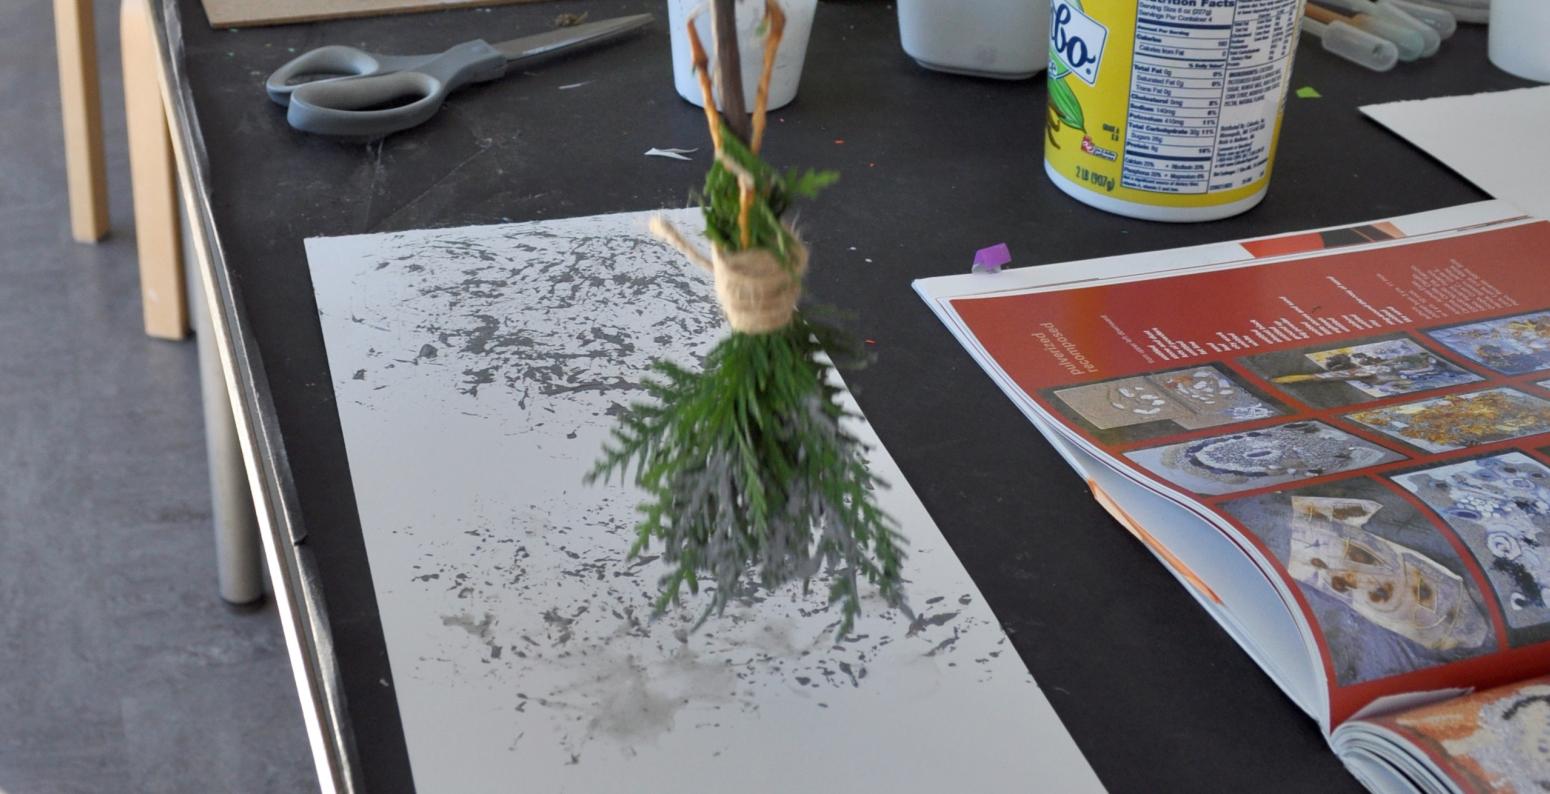 An adult painting with a clay and water mixture using a homemade paintbrush made from a twig and leaves.